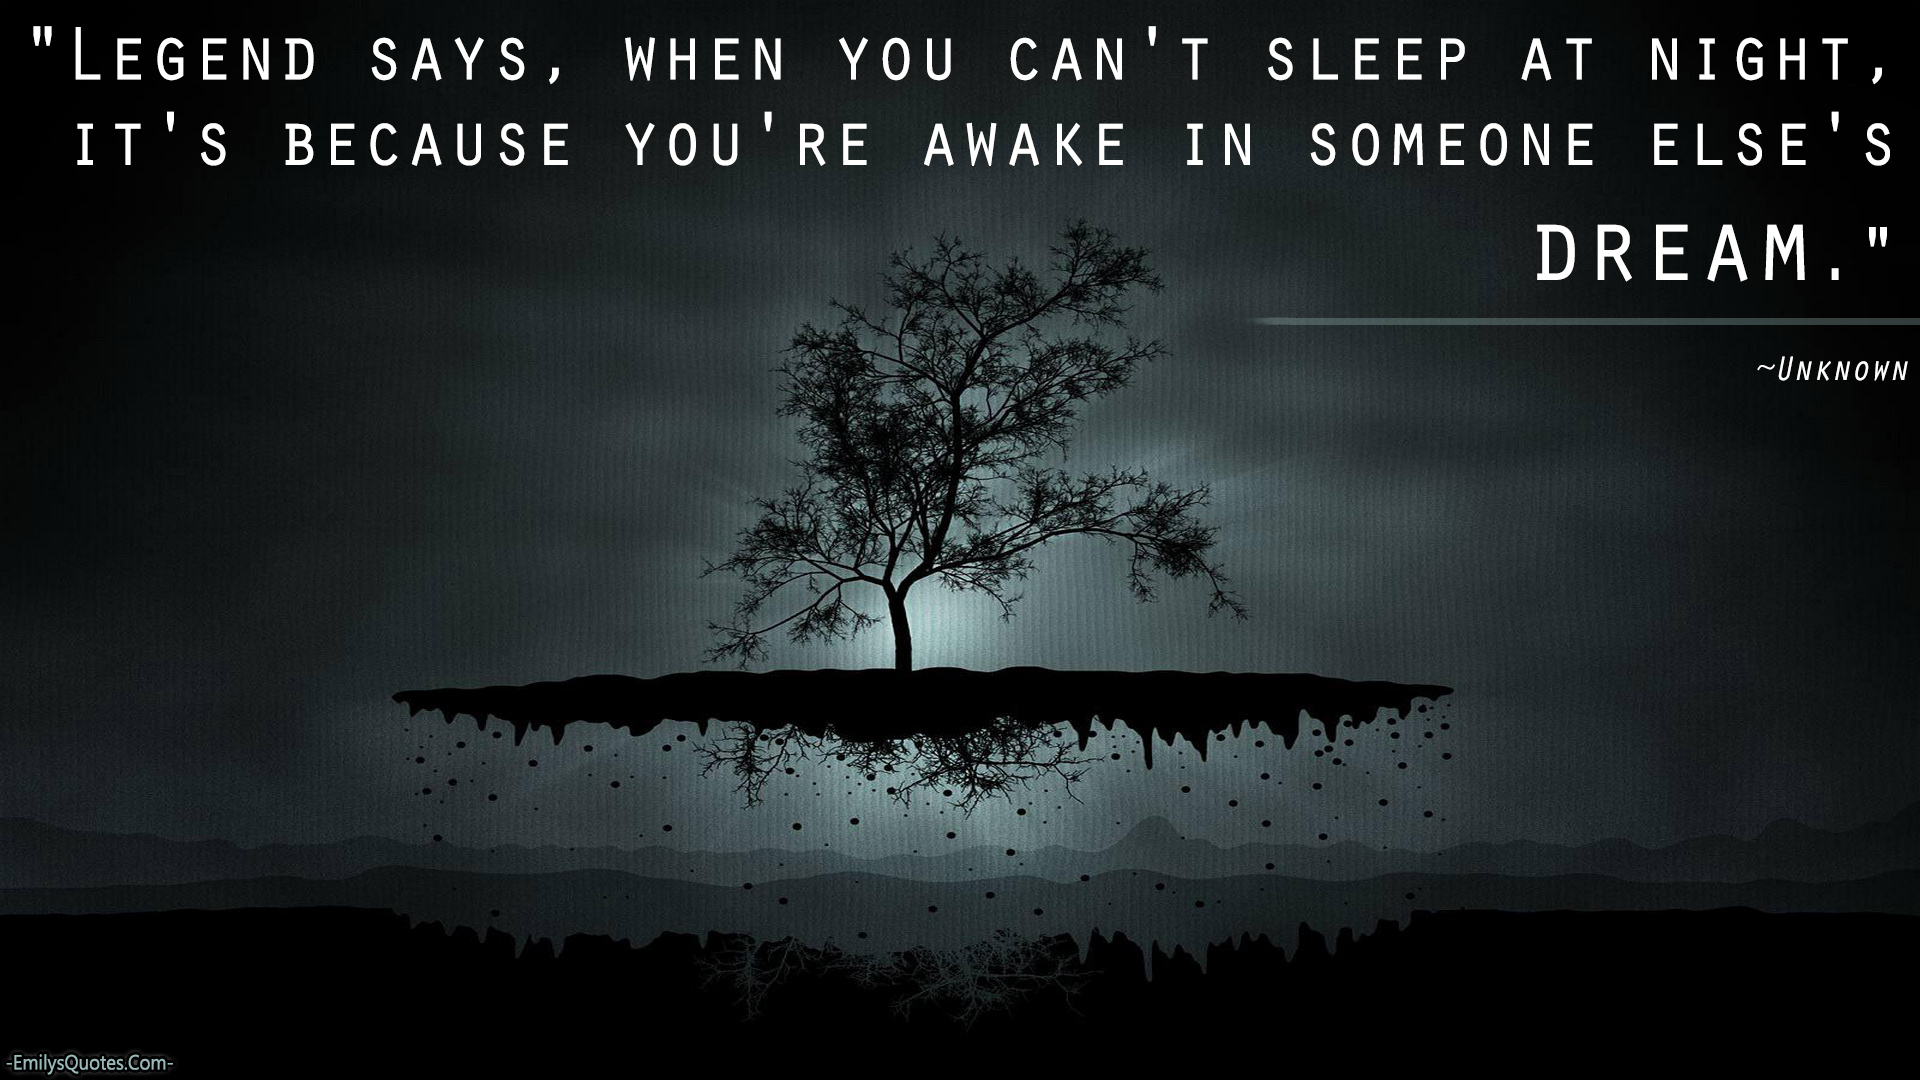 Legend says, when you can’t sleep at night, it’s because you’re awake in someone else’s dream